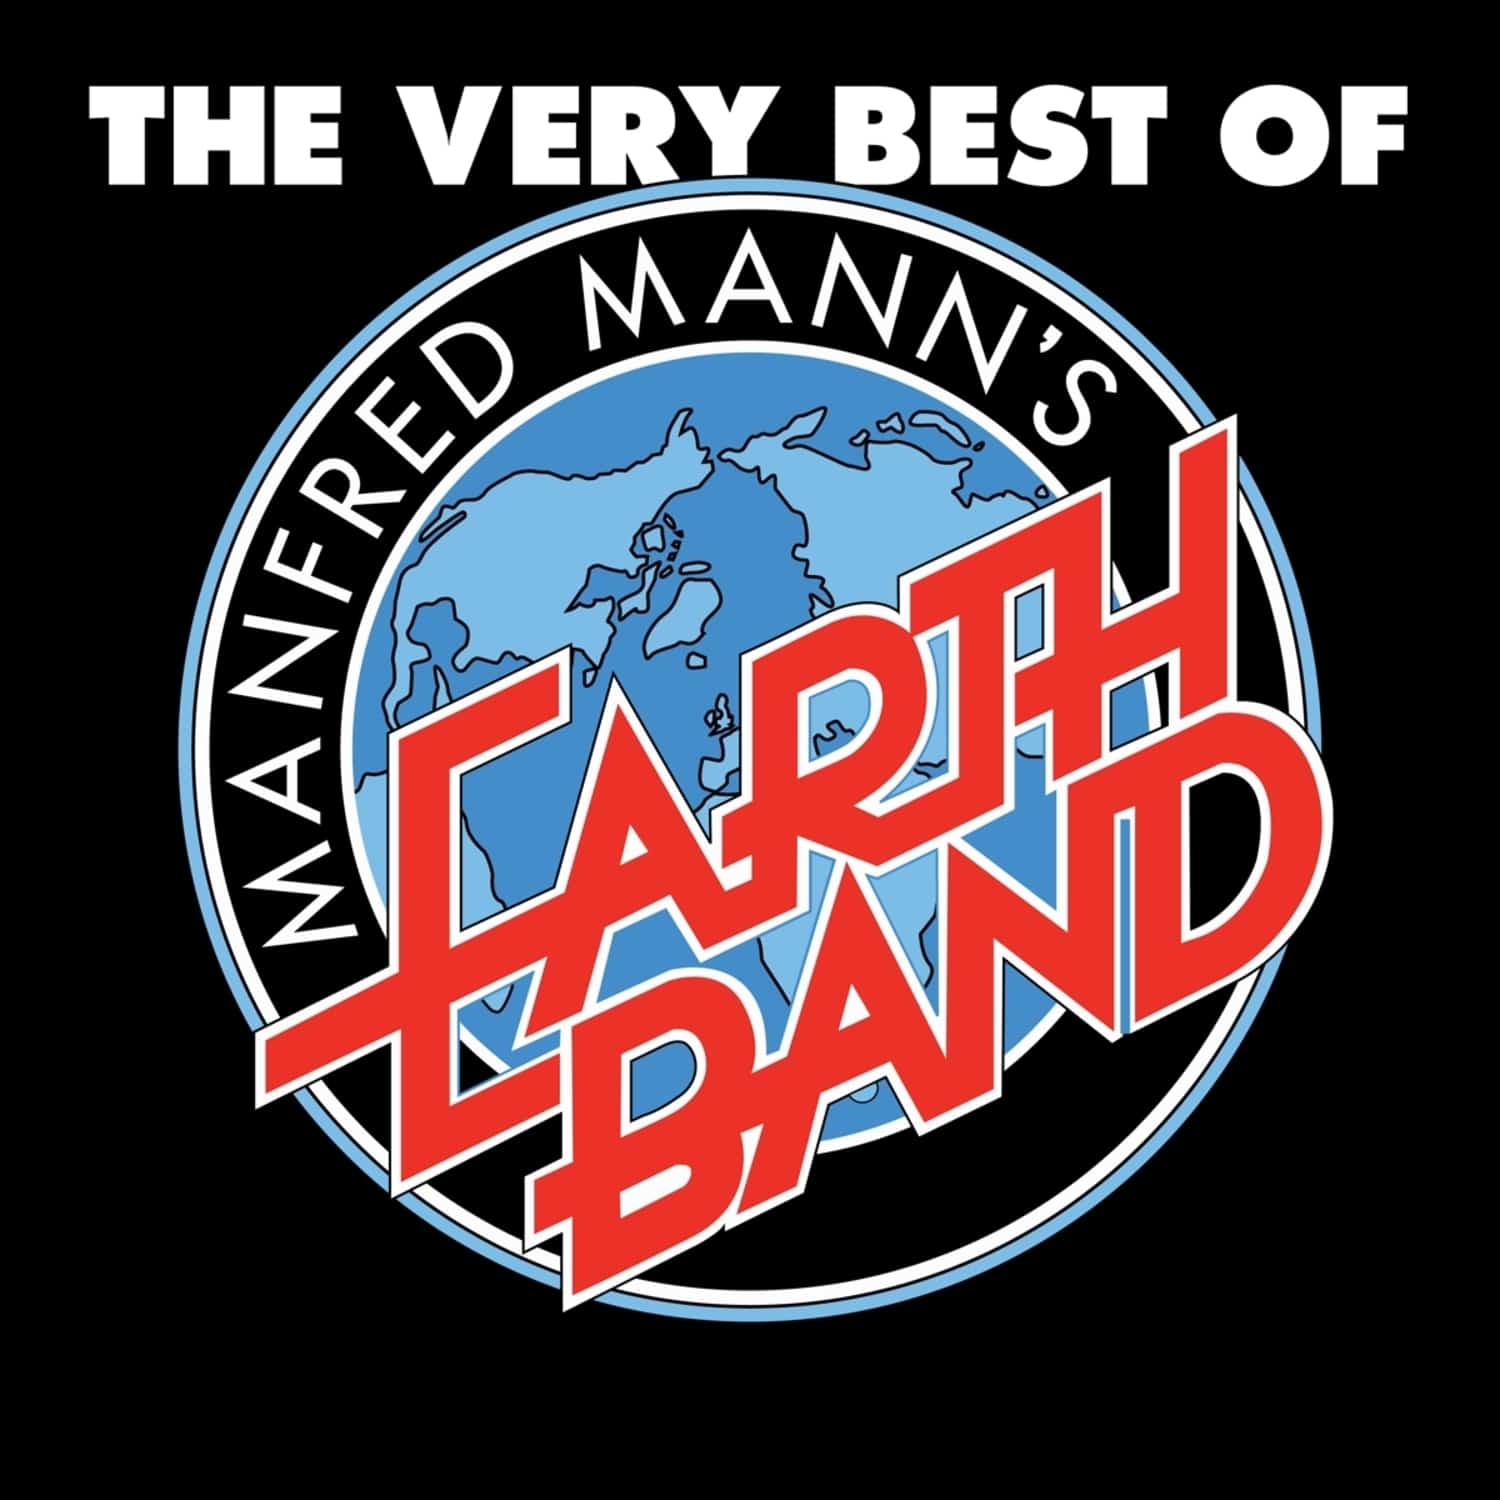 Manfred Mann s Earth Band - THE VERY BEST OF 